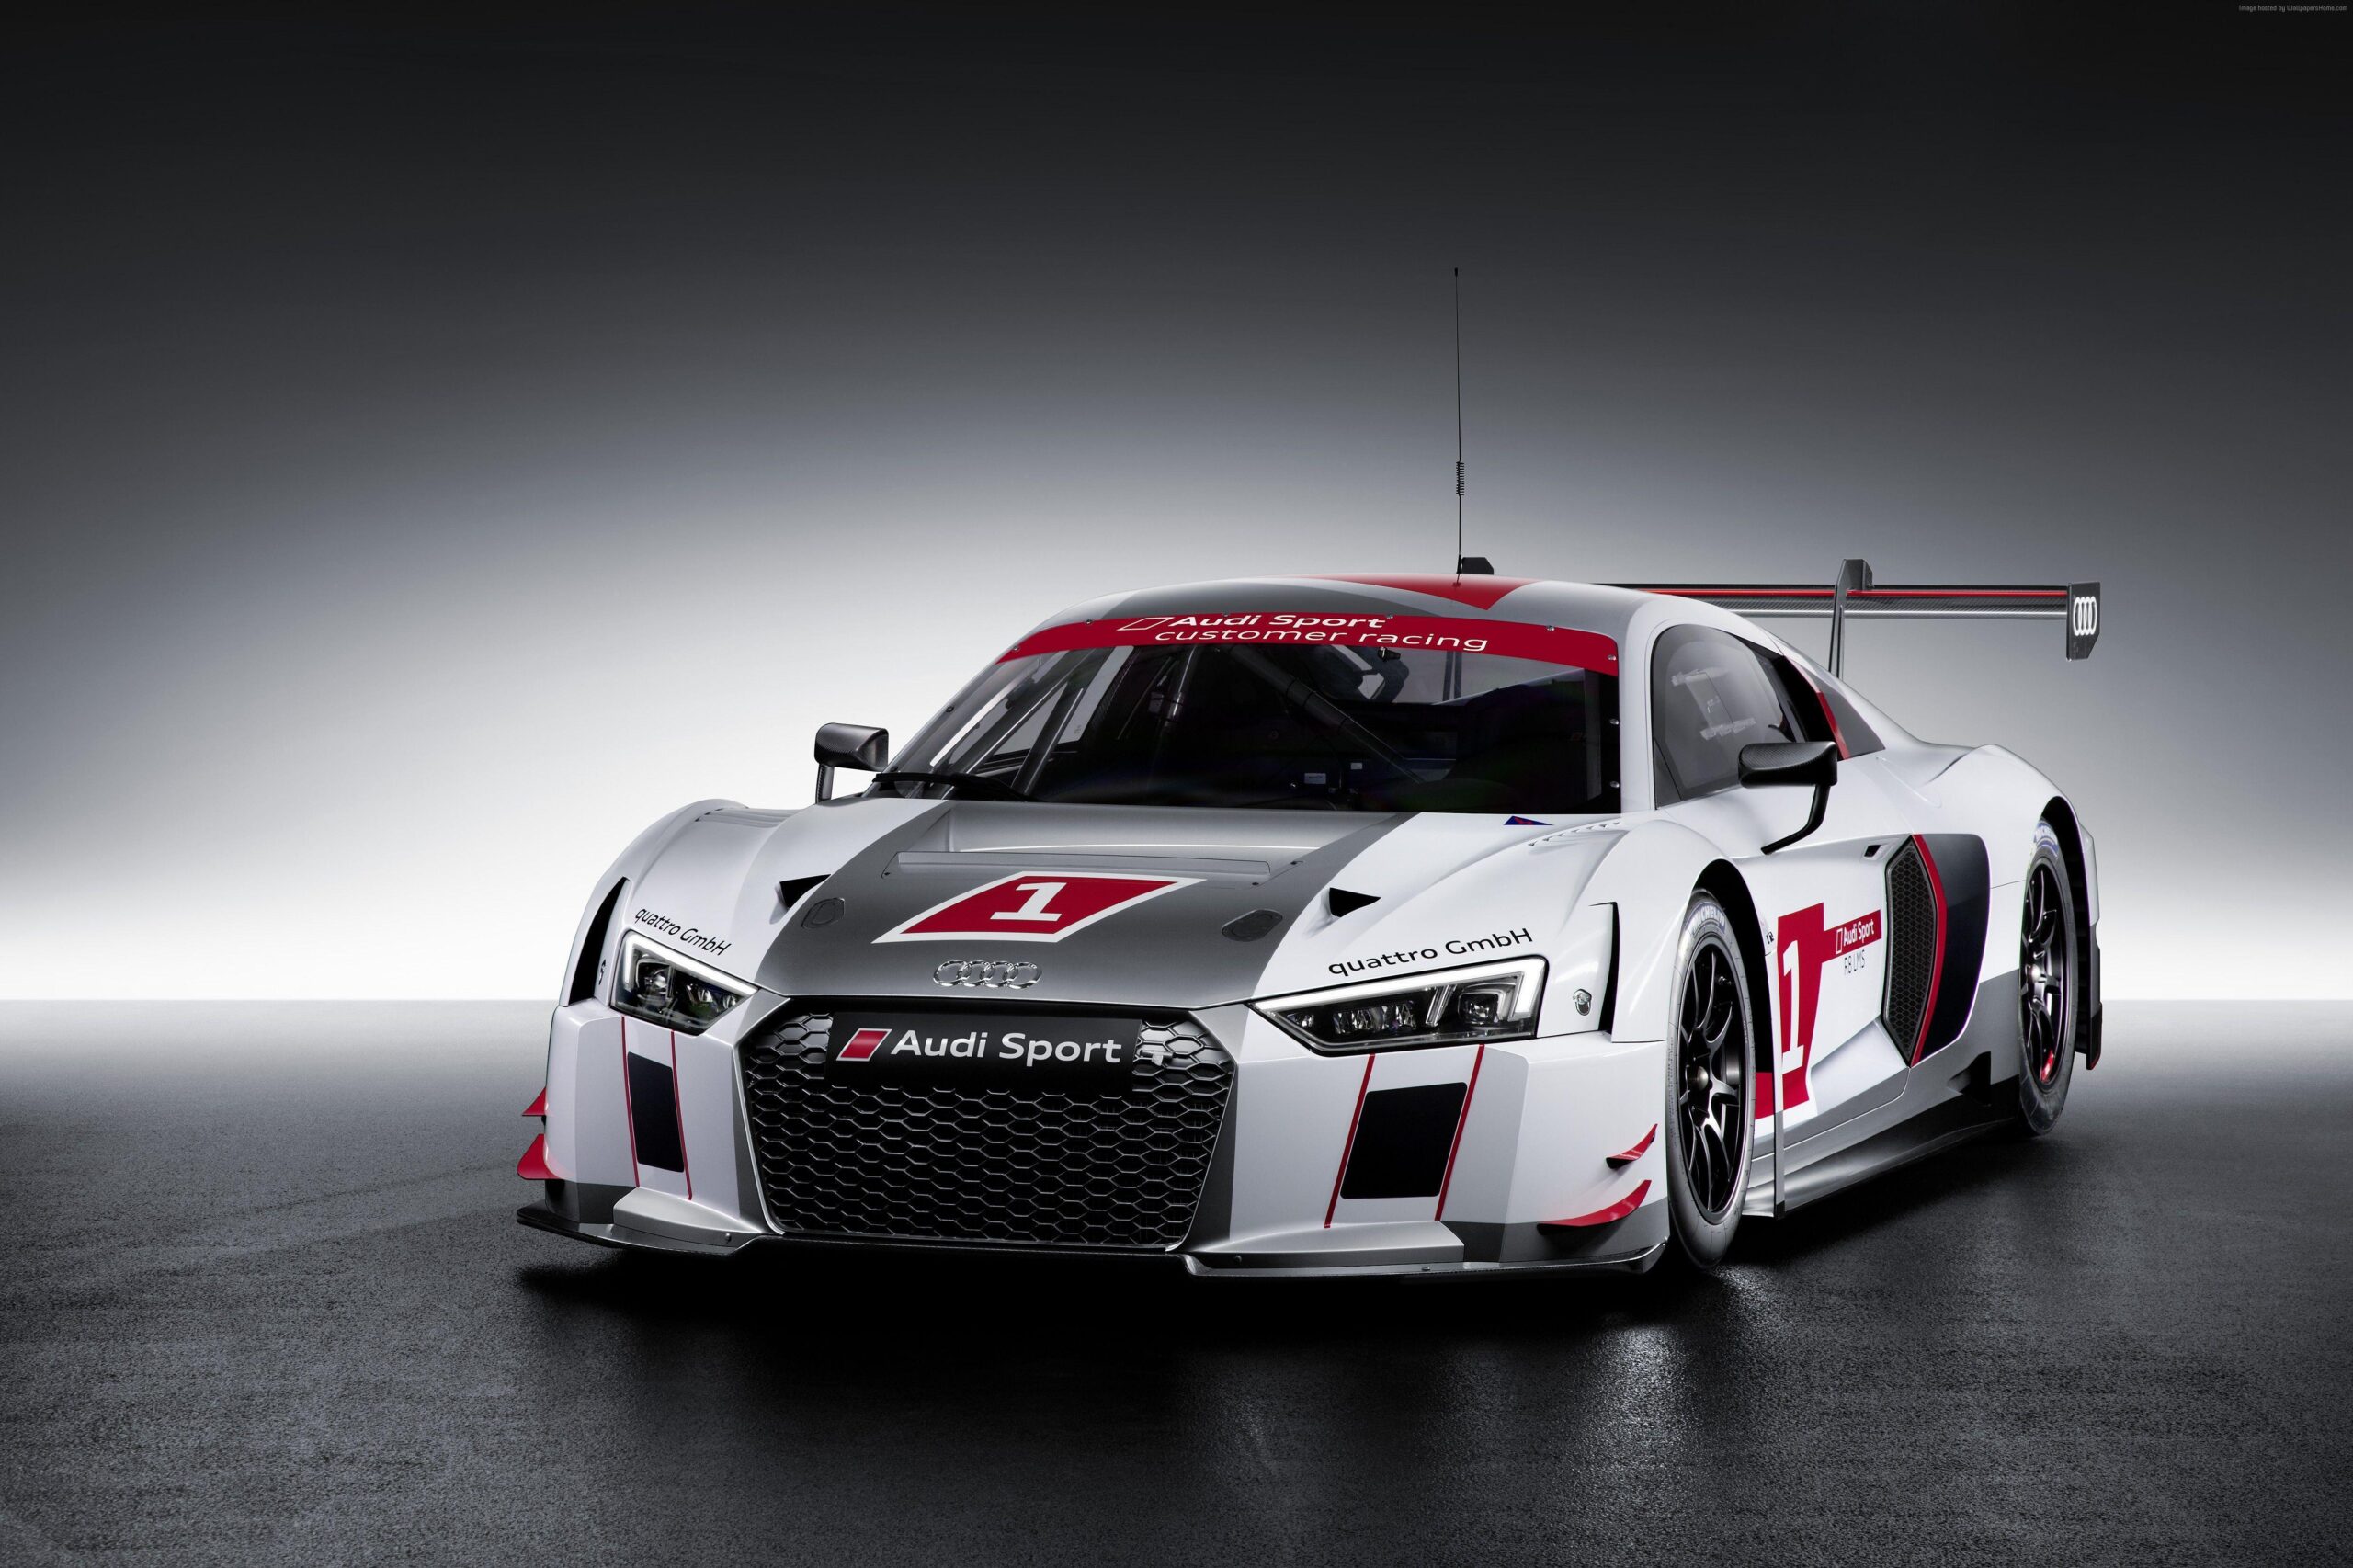 Wallpapers Audi R8 LMS, coupe, supercar, gray., Cars & Bikes